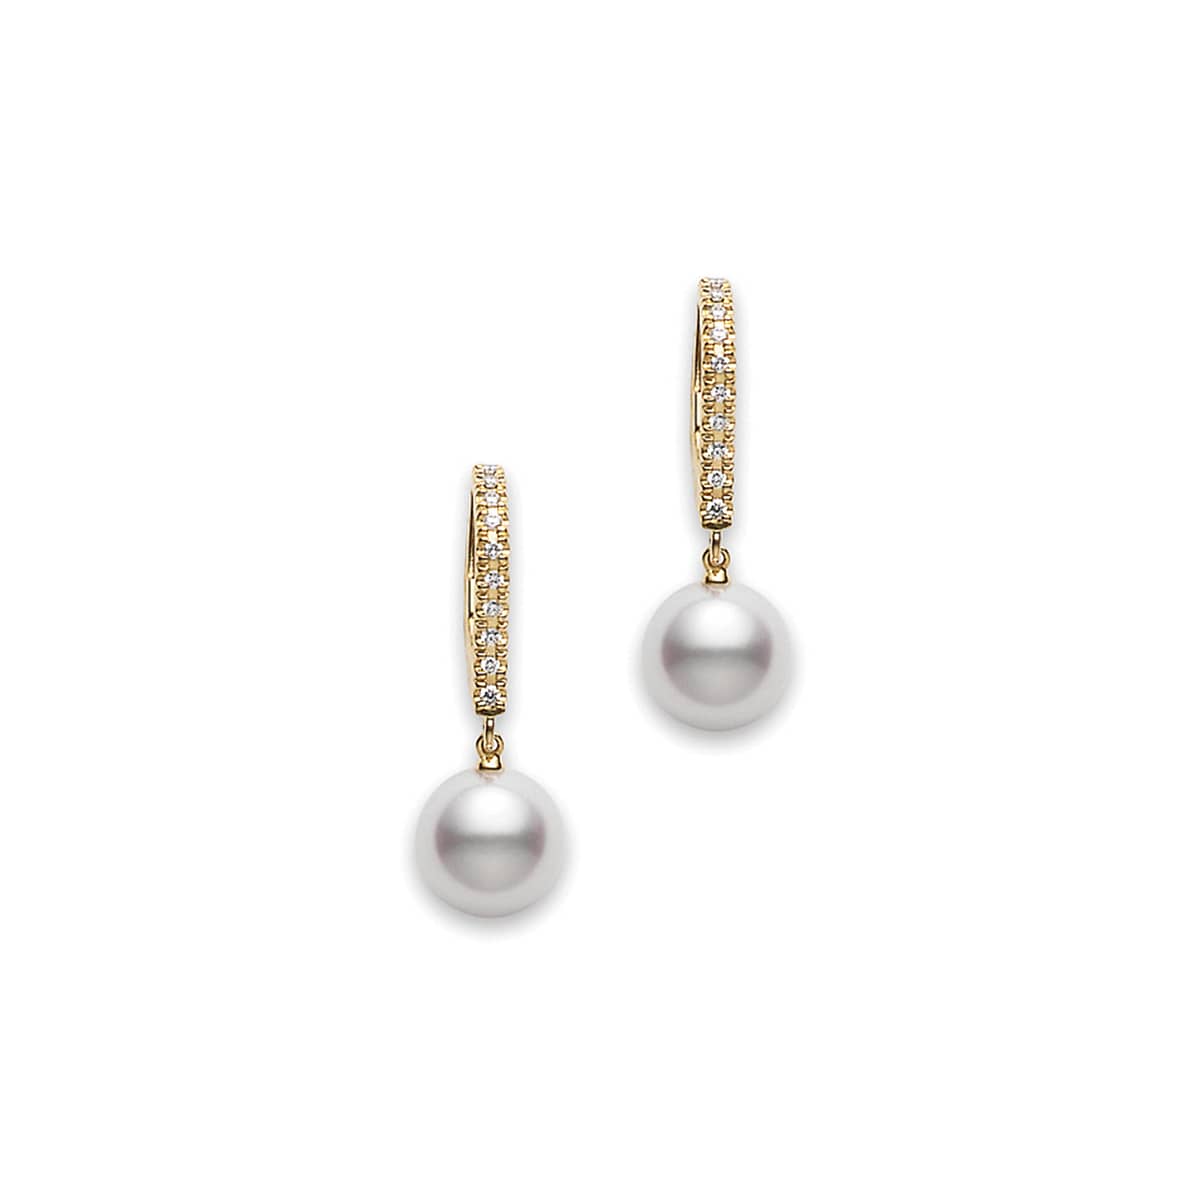 Mikimoto 18k Yellow Gold and Diamond Drop Pearl Earrings. Set with 7.5mm Ayoka Cultured pearls, these stunning drop earrings also feature 0.08ct diamonds, set along the 18k yellow gold drop. Complete any look in an instant with these timeless and elegant drop earrings from Mikimoto.